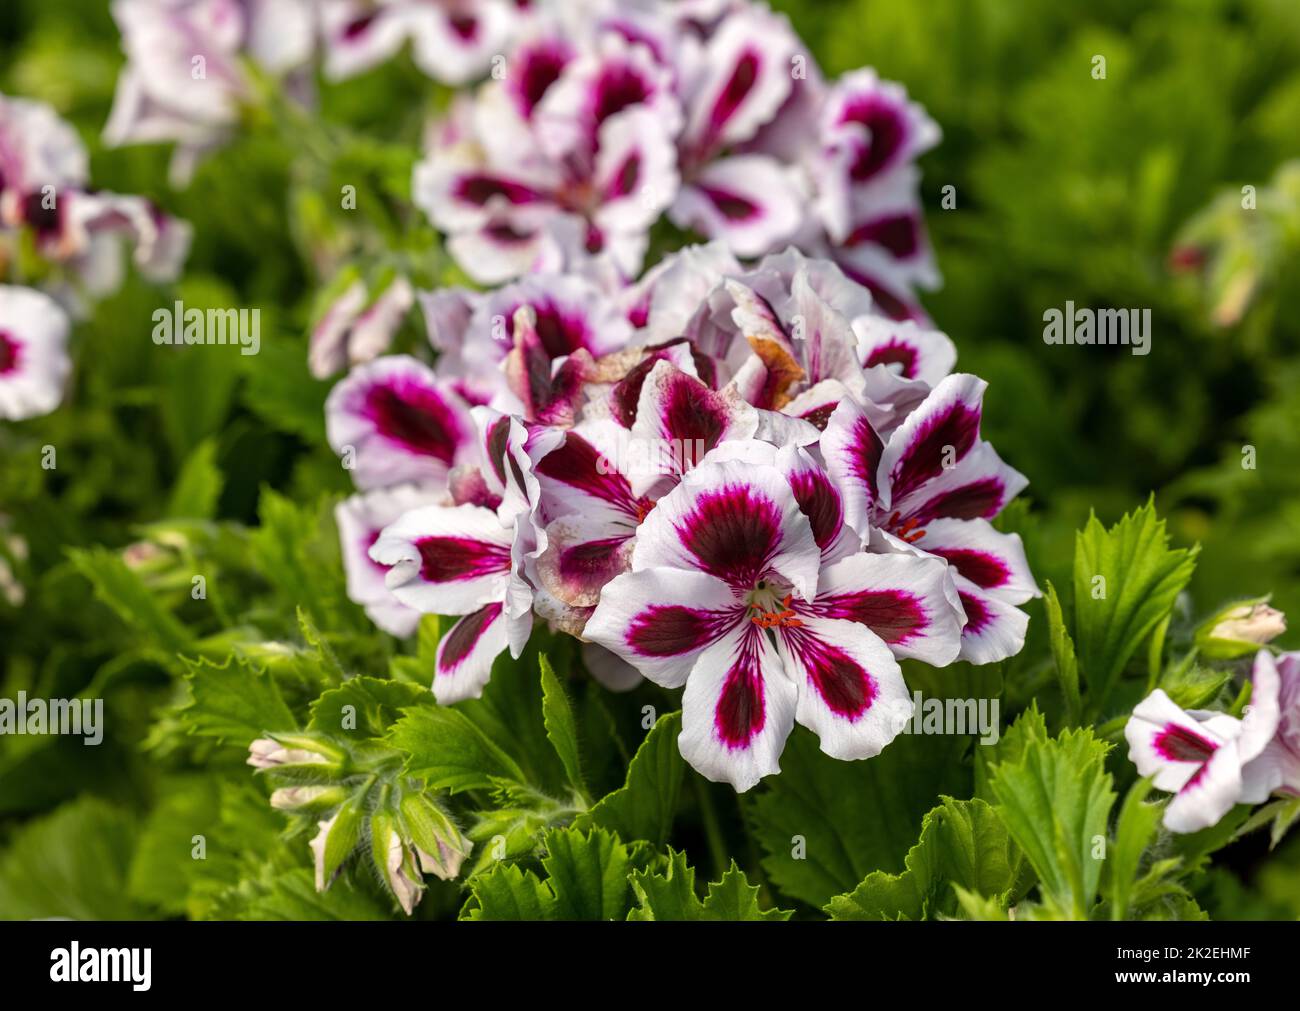 Flowers of a surfinia Stock Photo